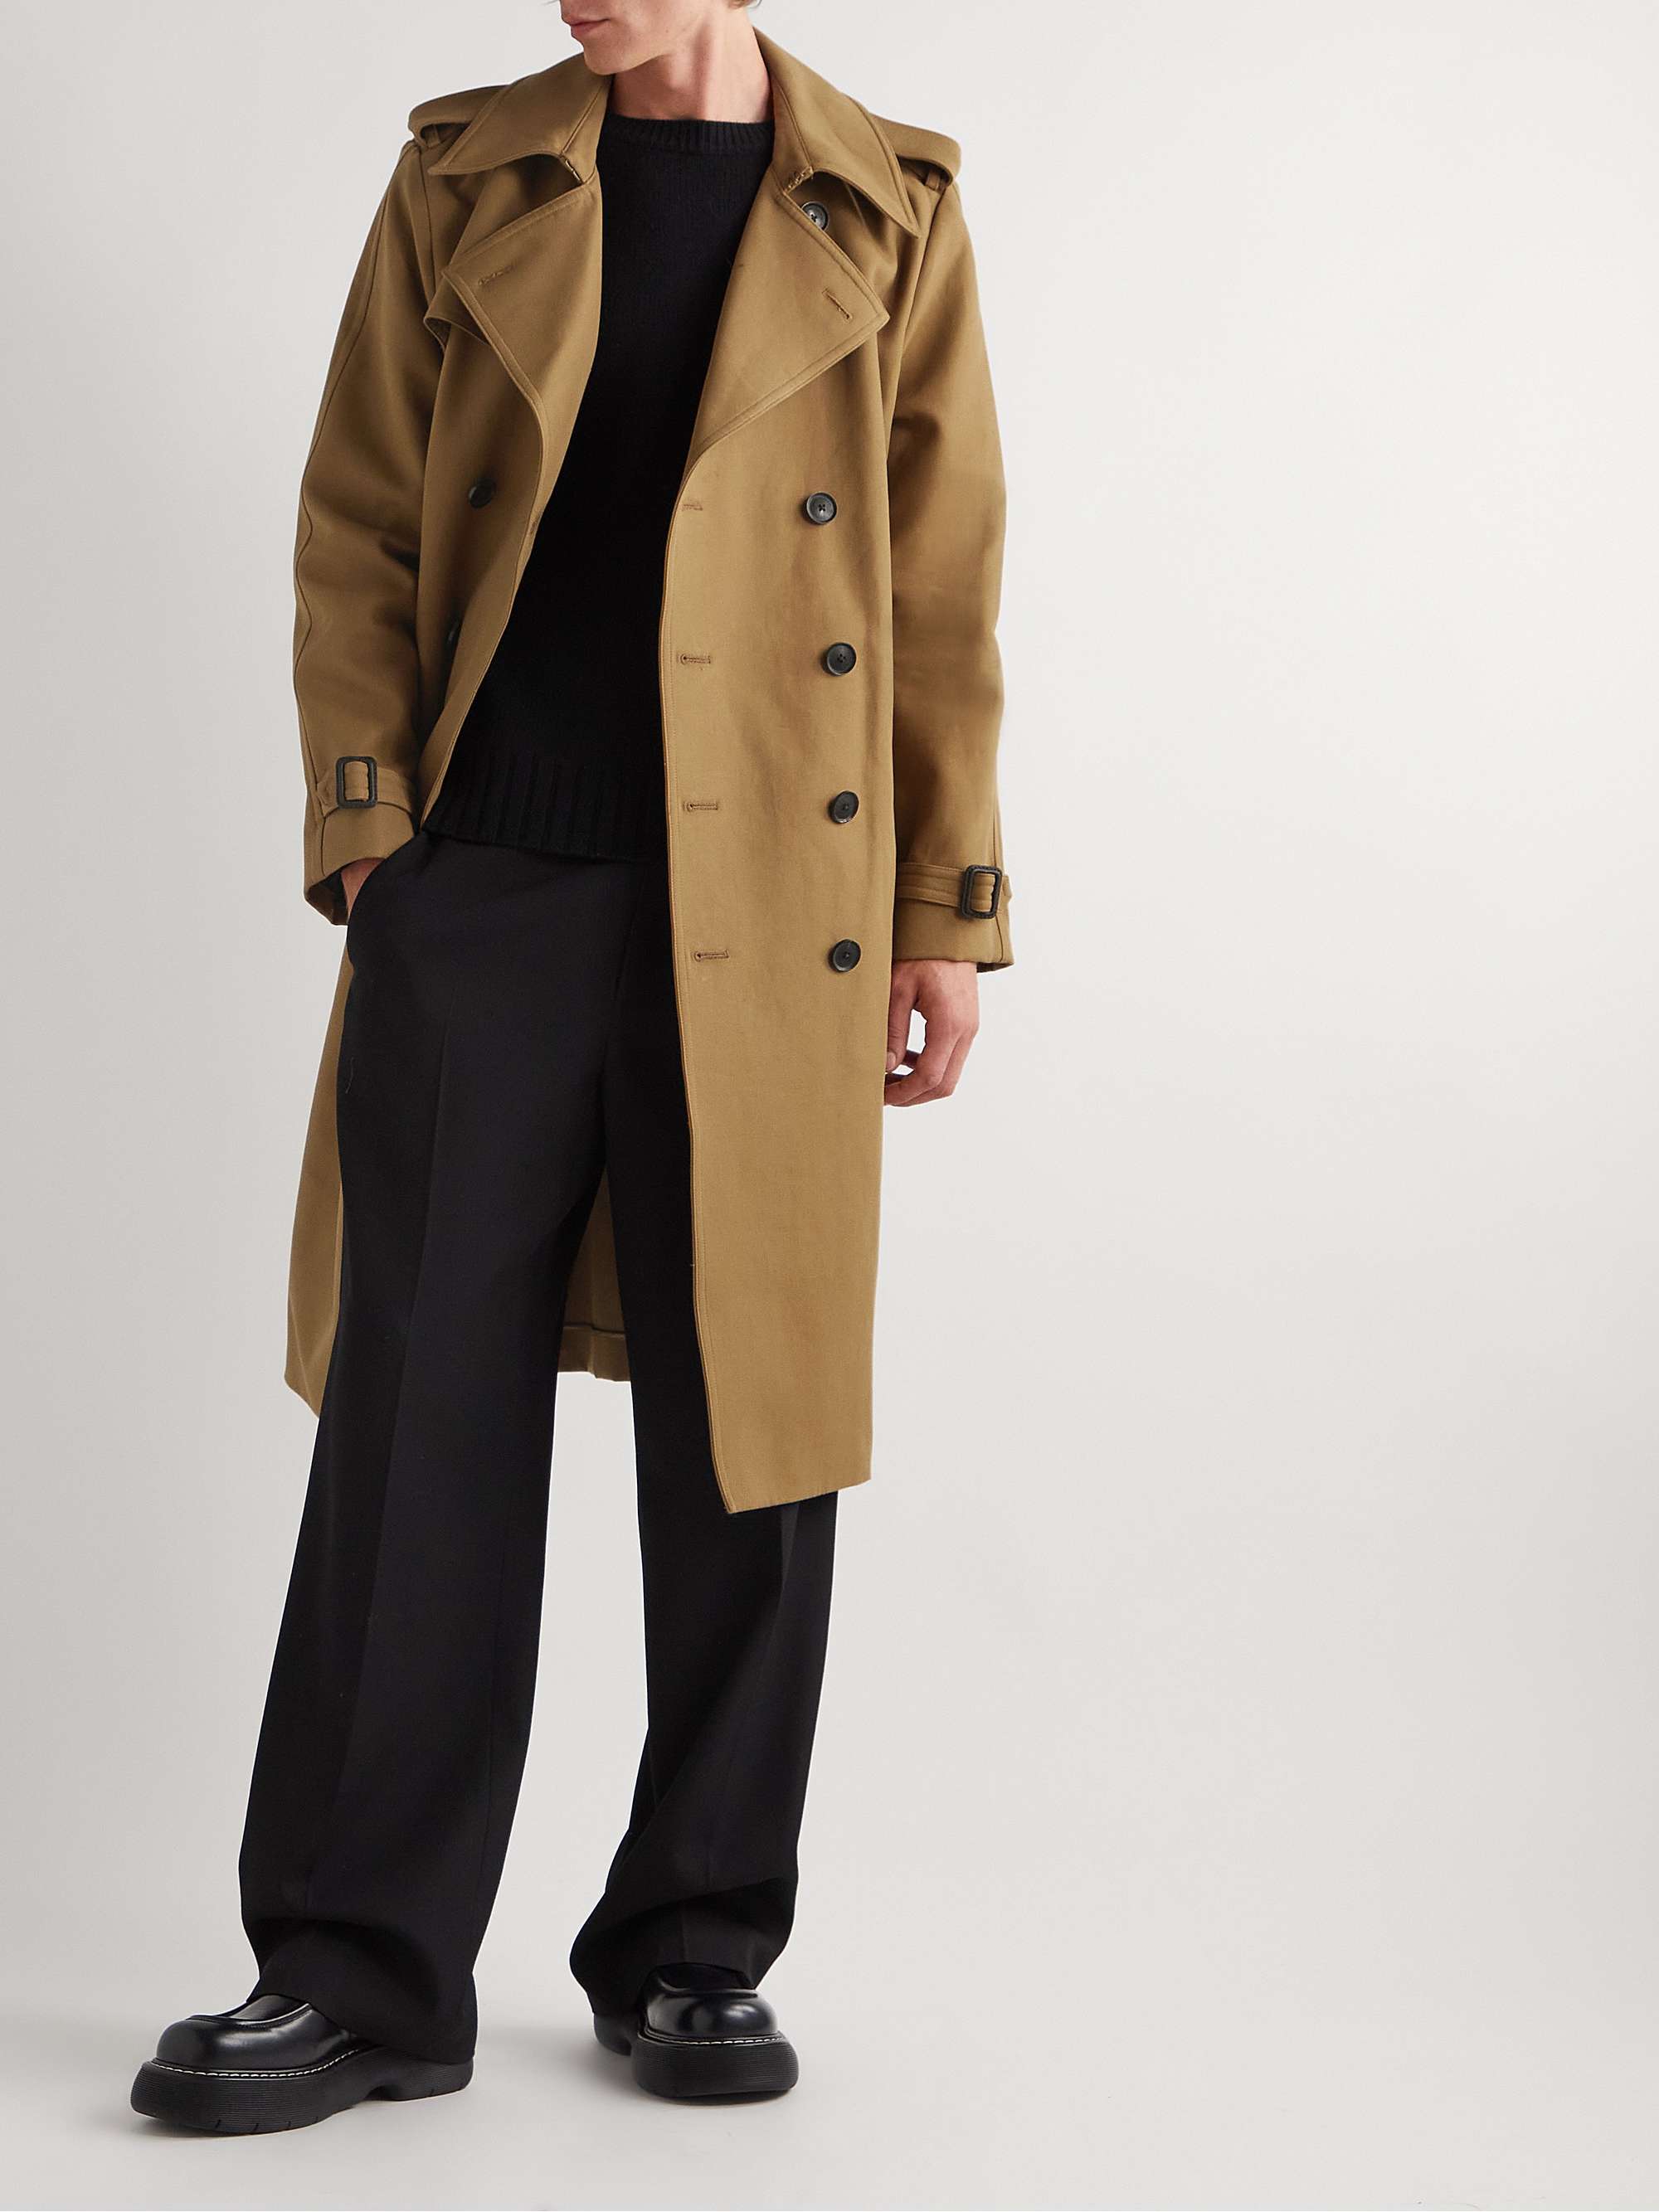 NILI LOTAN Trenton Double-Breasted Belted Cotton-Canvas Trench Coat